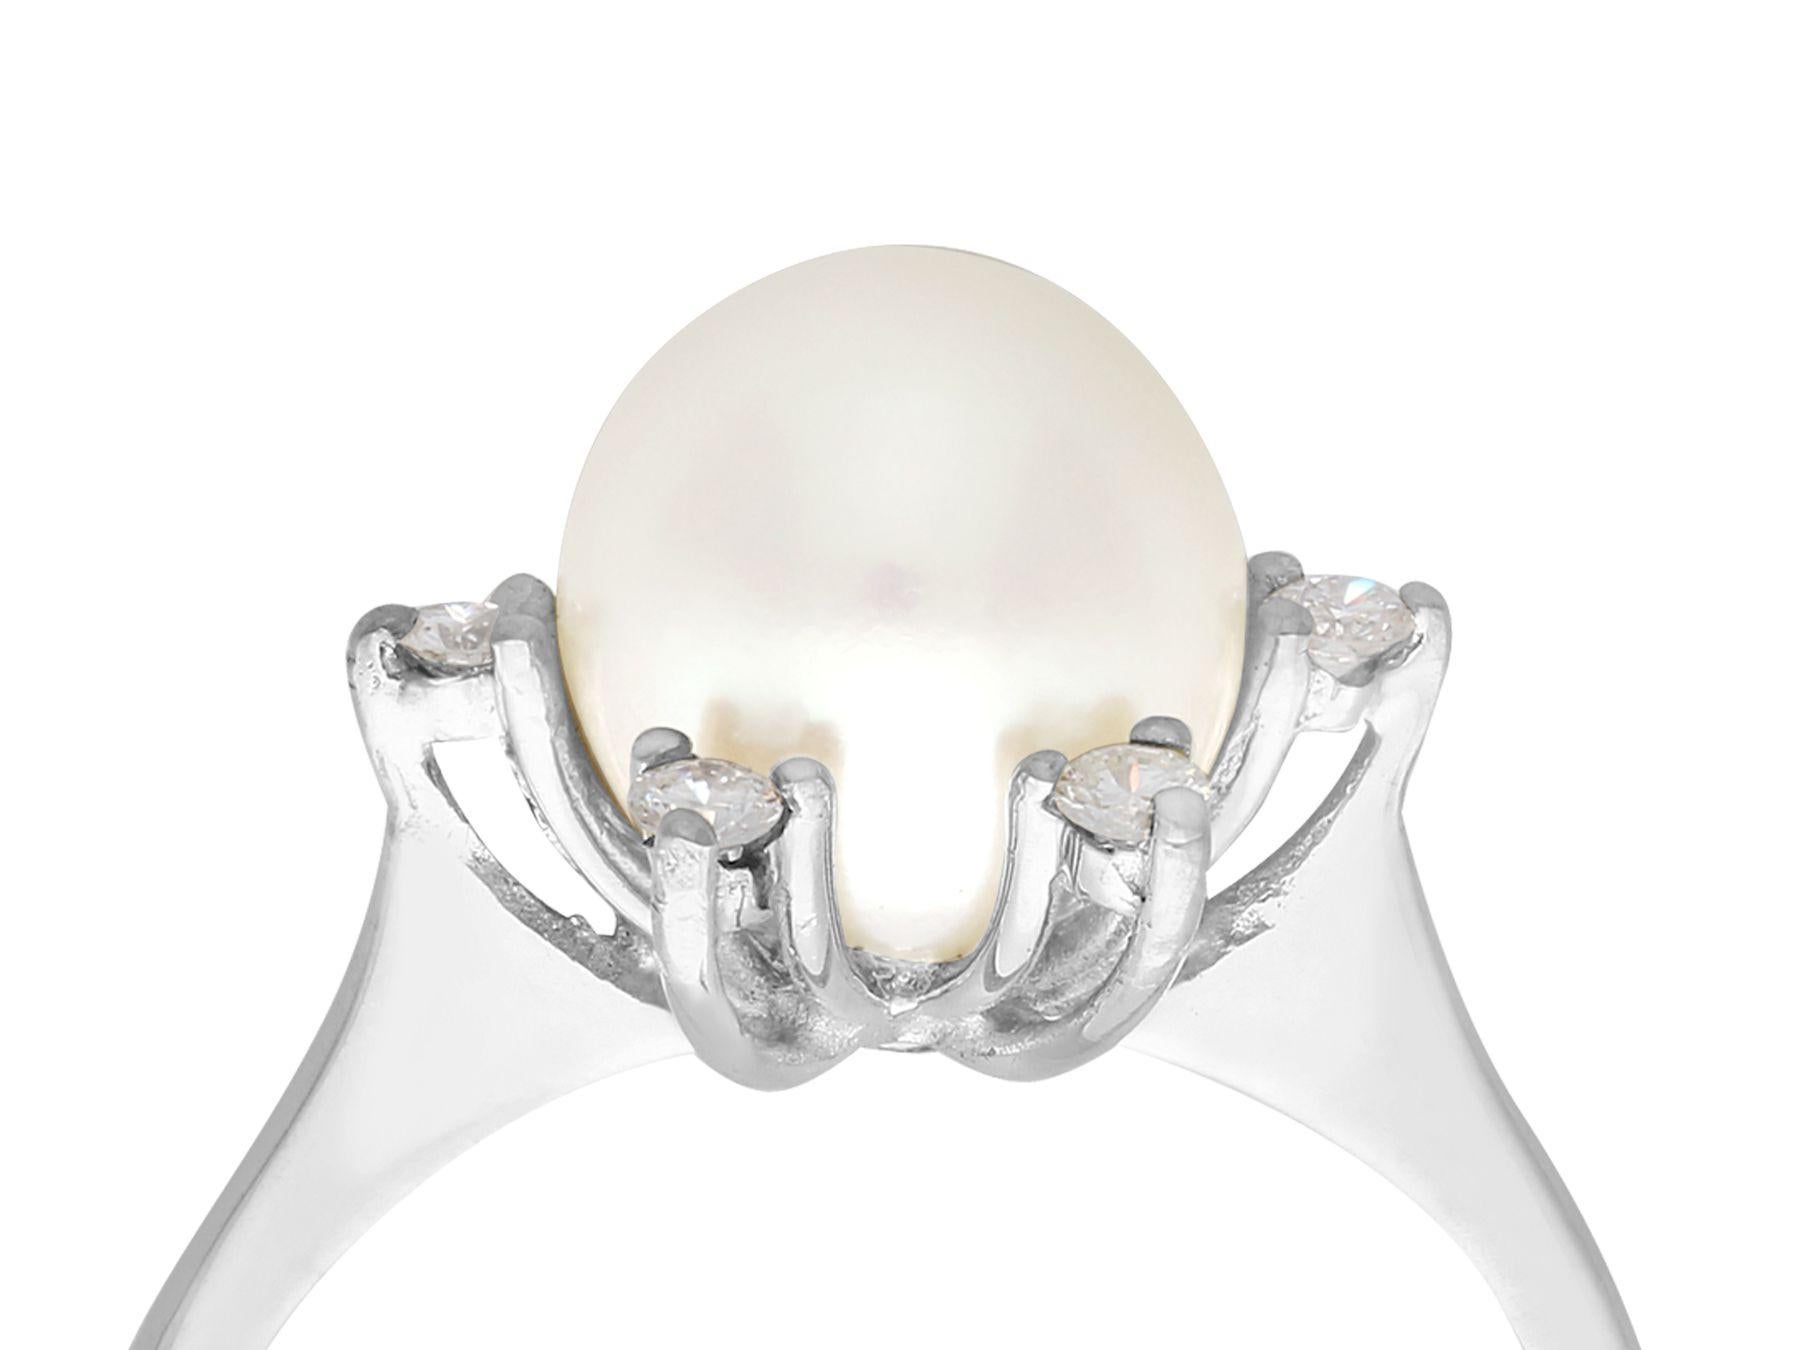 A fine and impressive antique cultured pearl and 0.18 carat diamond, 18k white gold dress ring; part of our antique jewelry and estate jewelry collections

This fine and impressive cultured pearl dress ring has been crafted in 18k white gold.

The